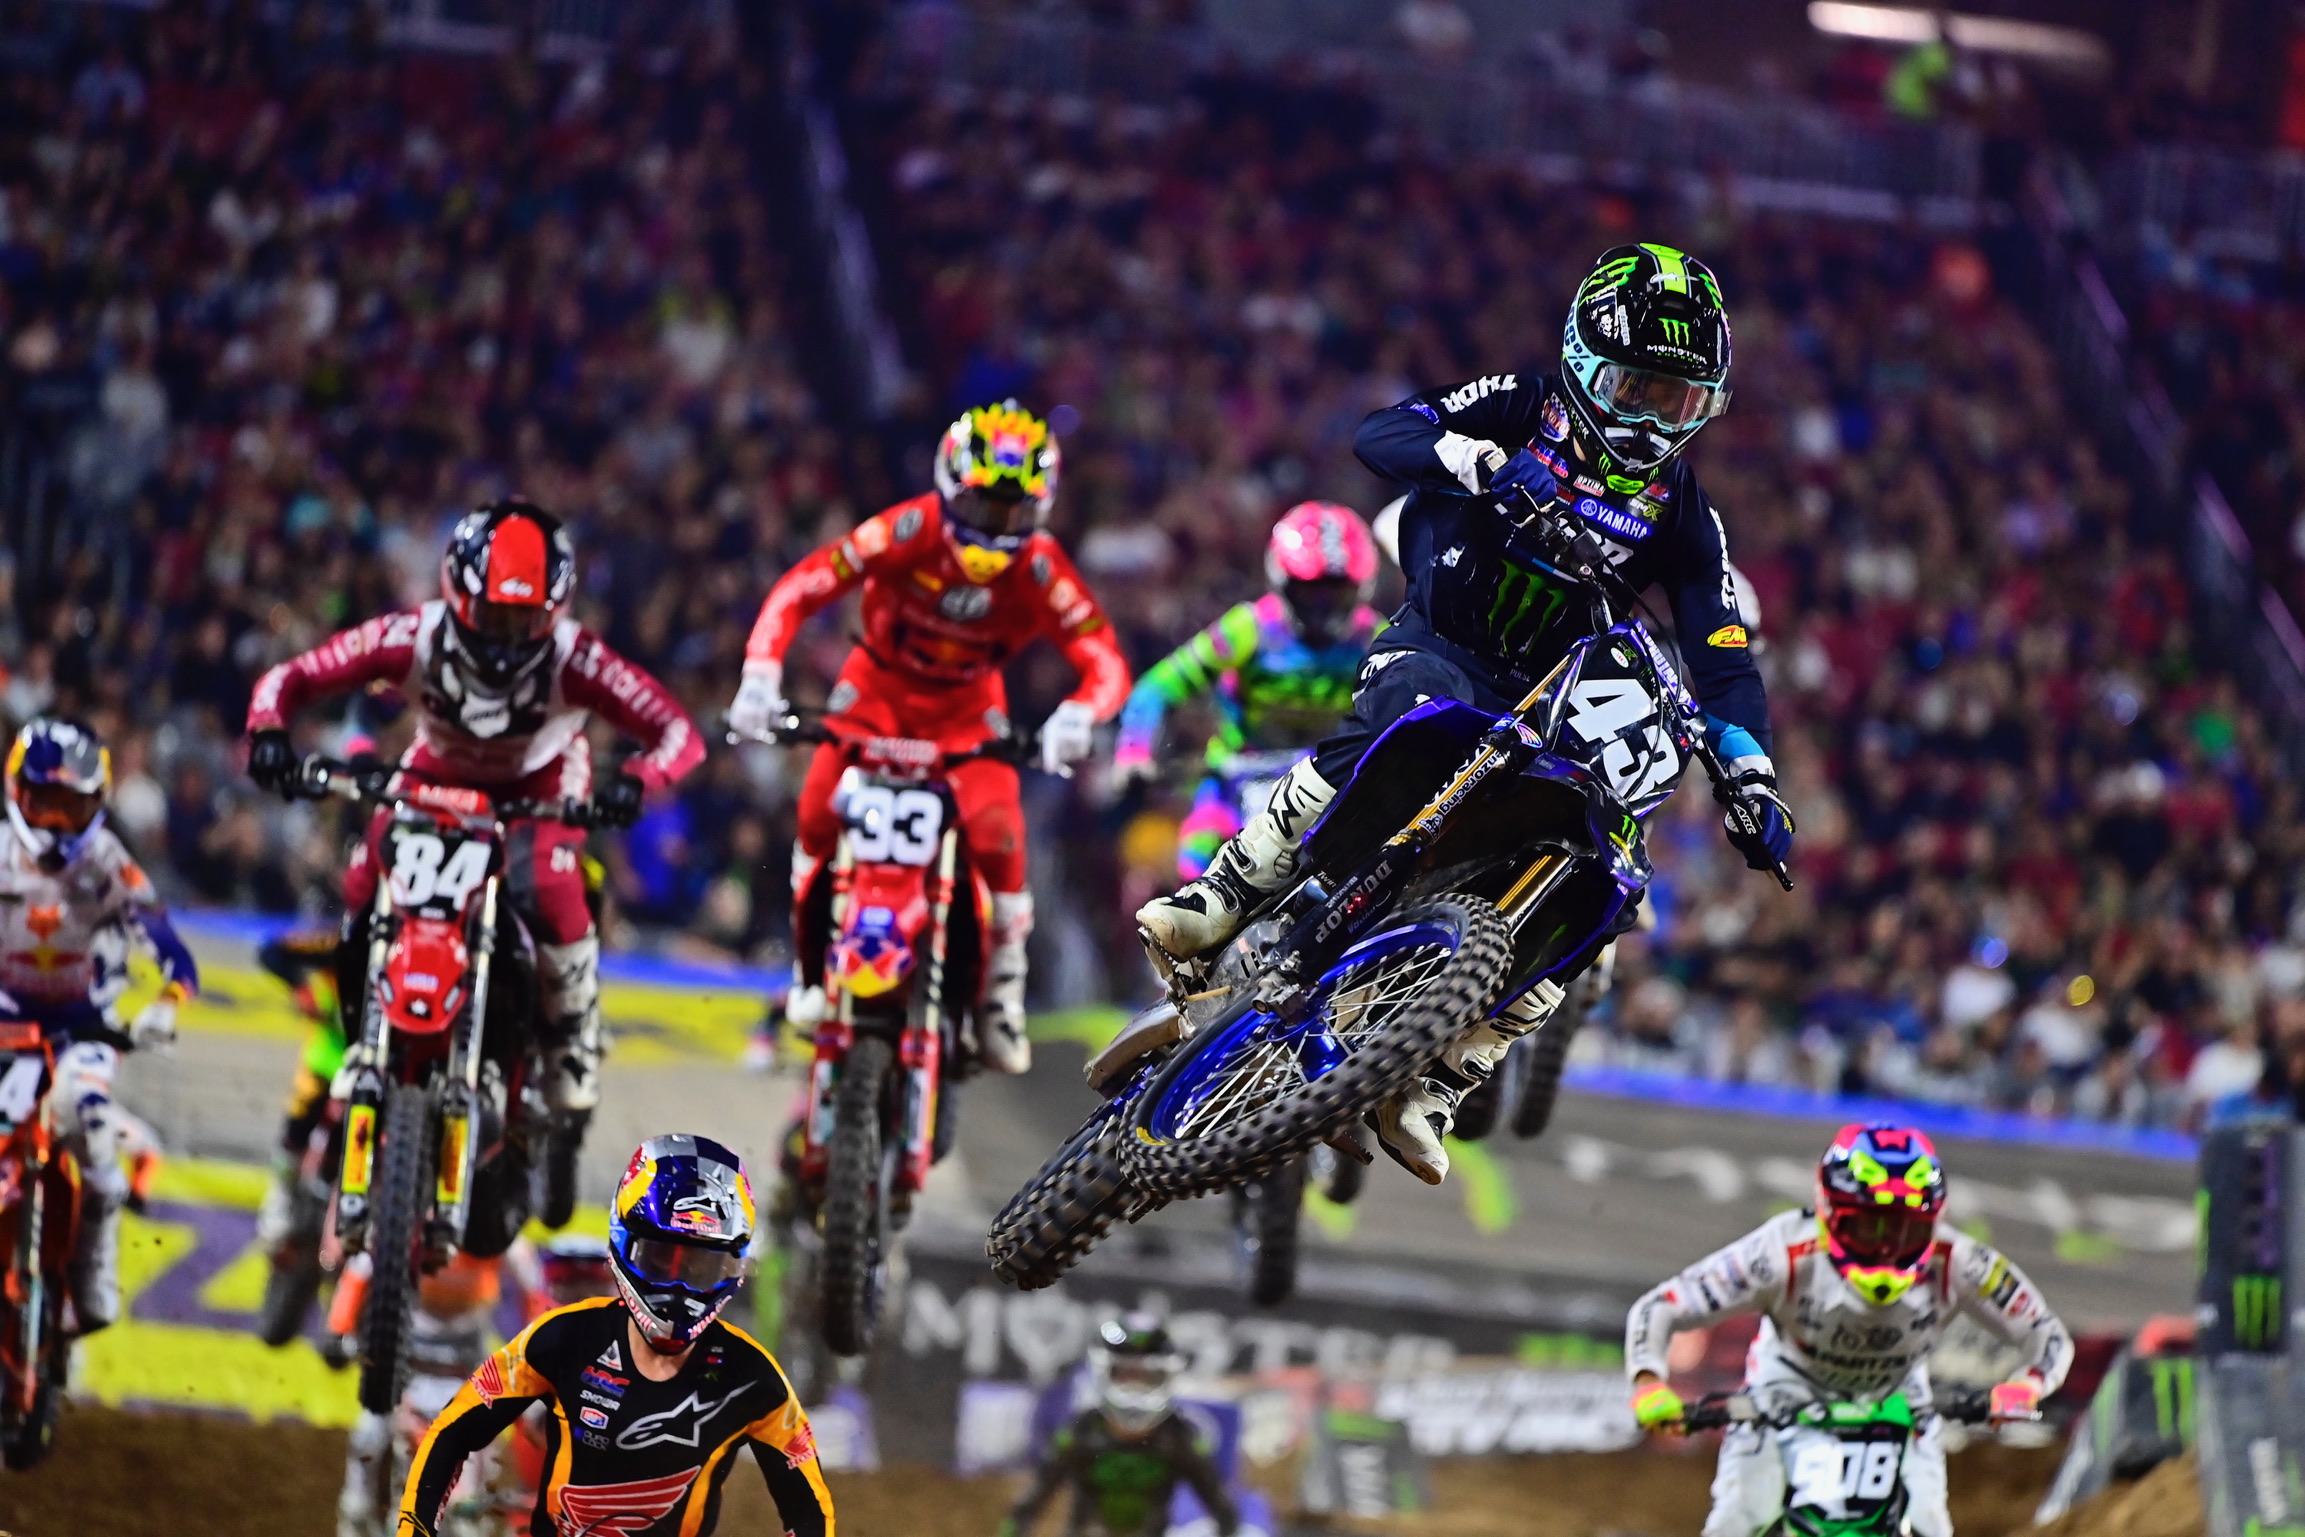 Levi Kitchen Scores Another 250 Triple Crown Podium in Glendale  image